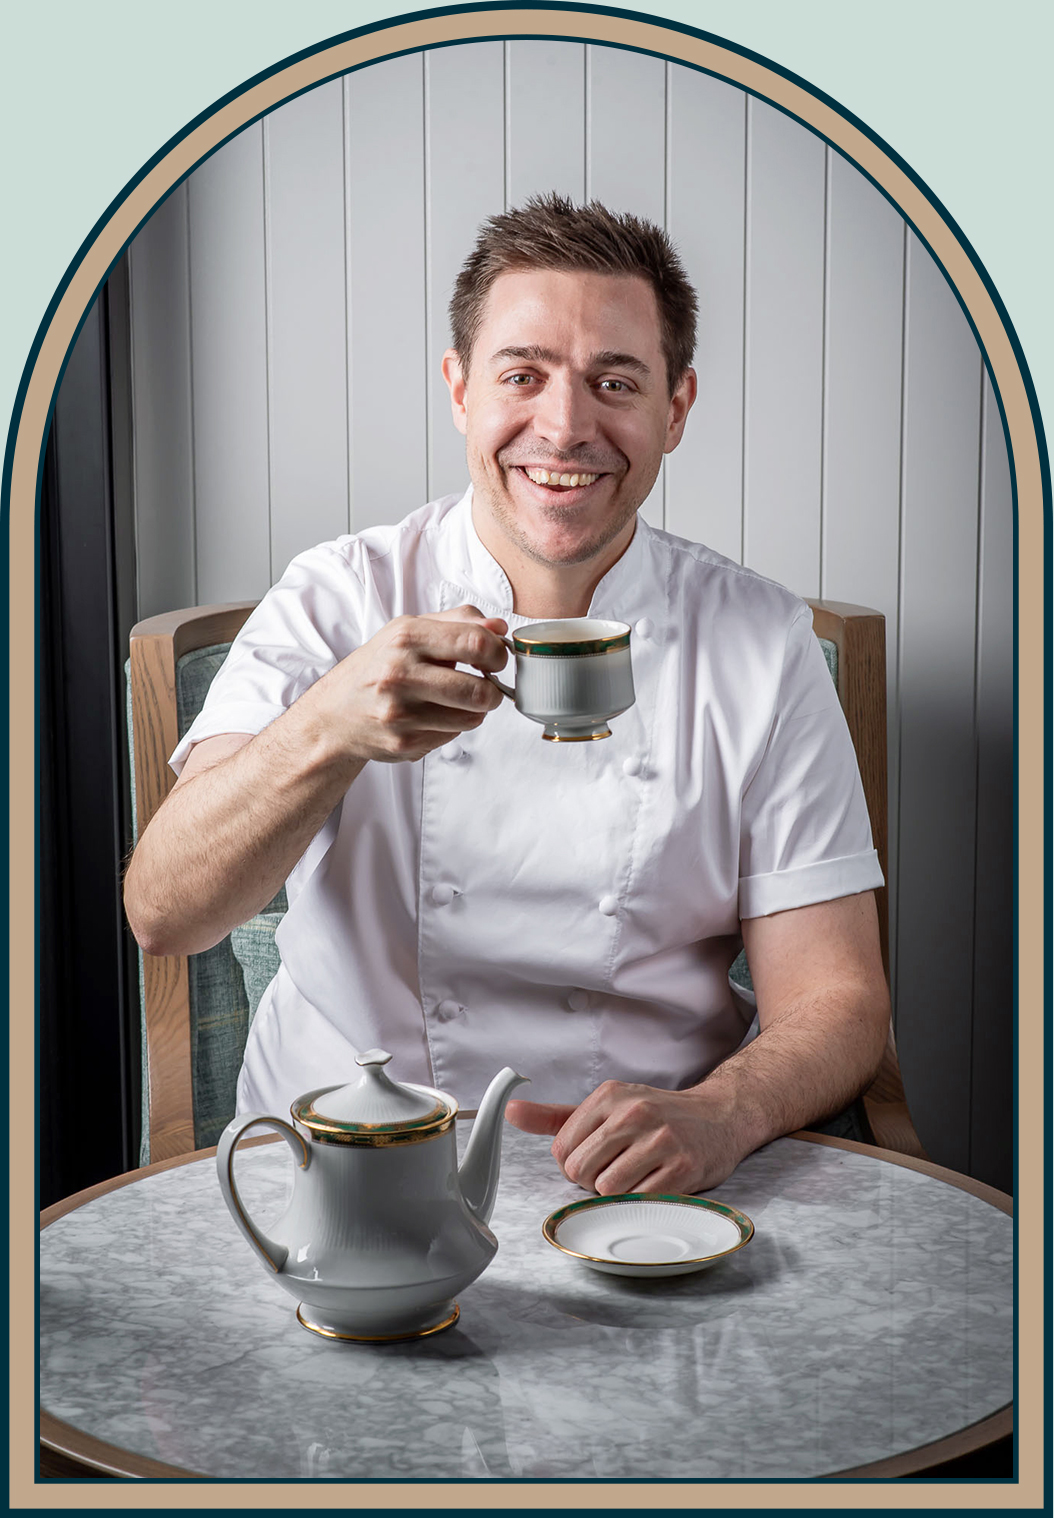 Portrait of District Executive Chef Ryan Lister holding a cup of tea